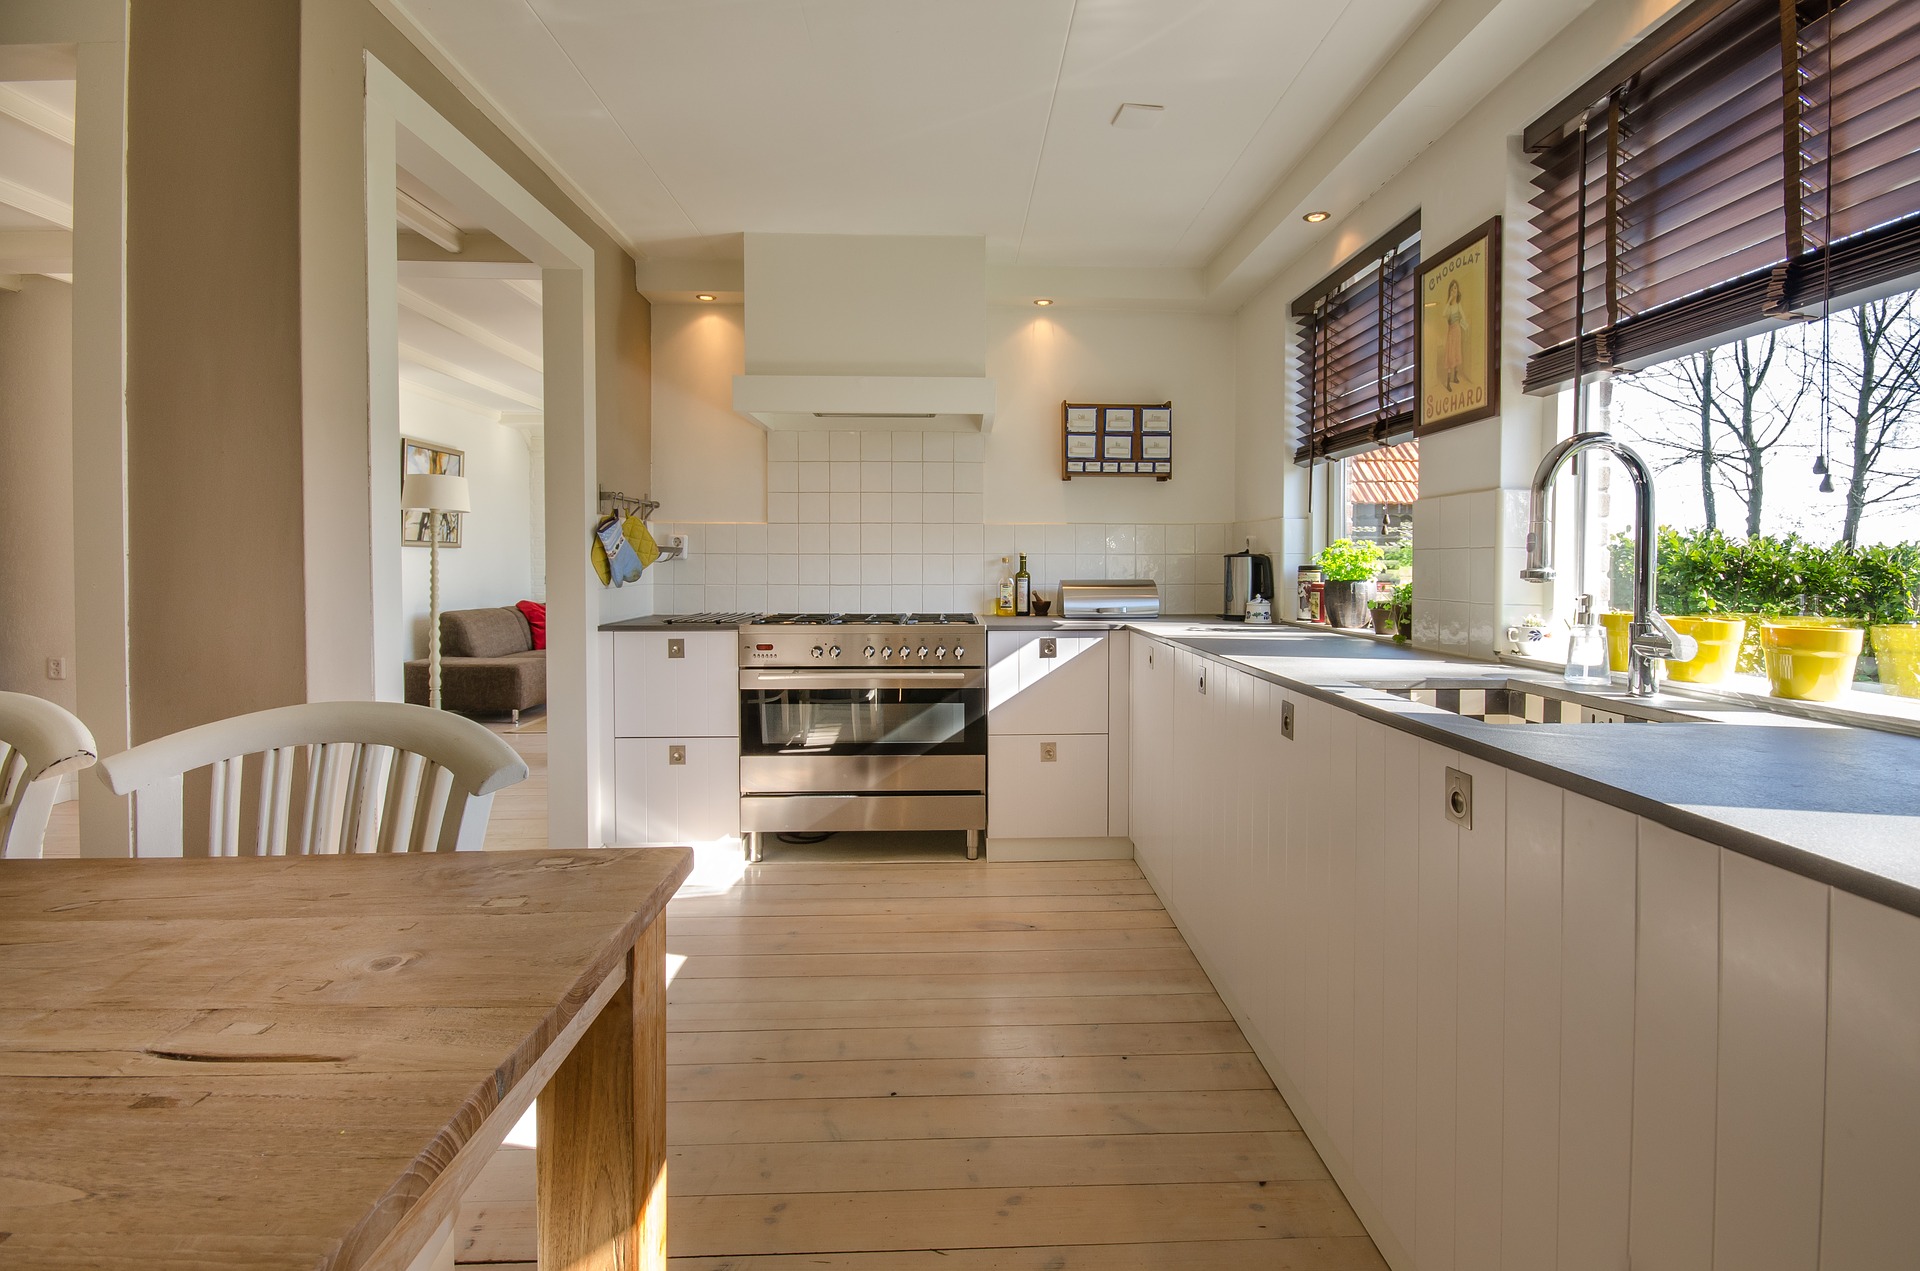 Kitchen Flooring – What Are The Best Options?